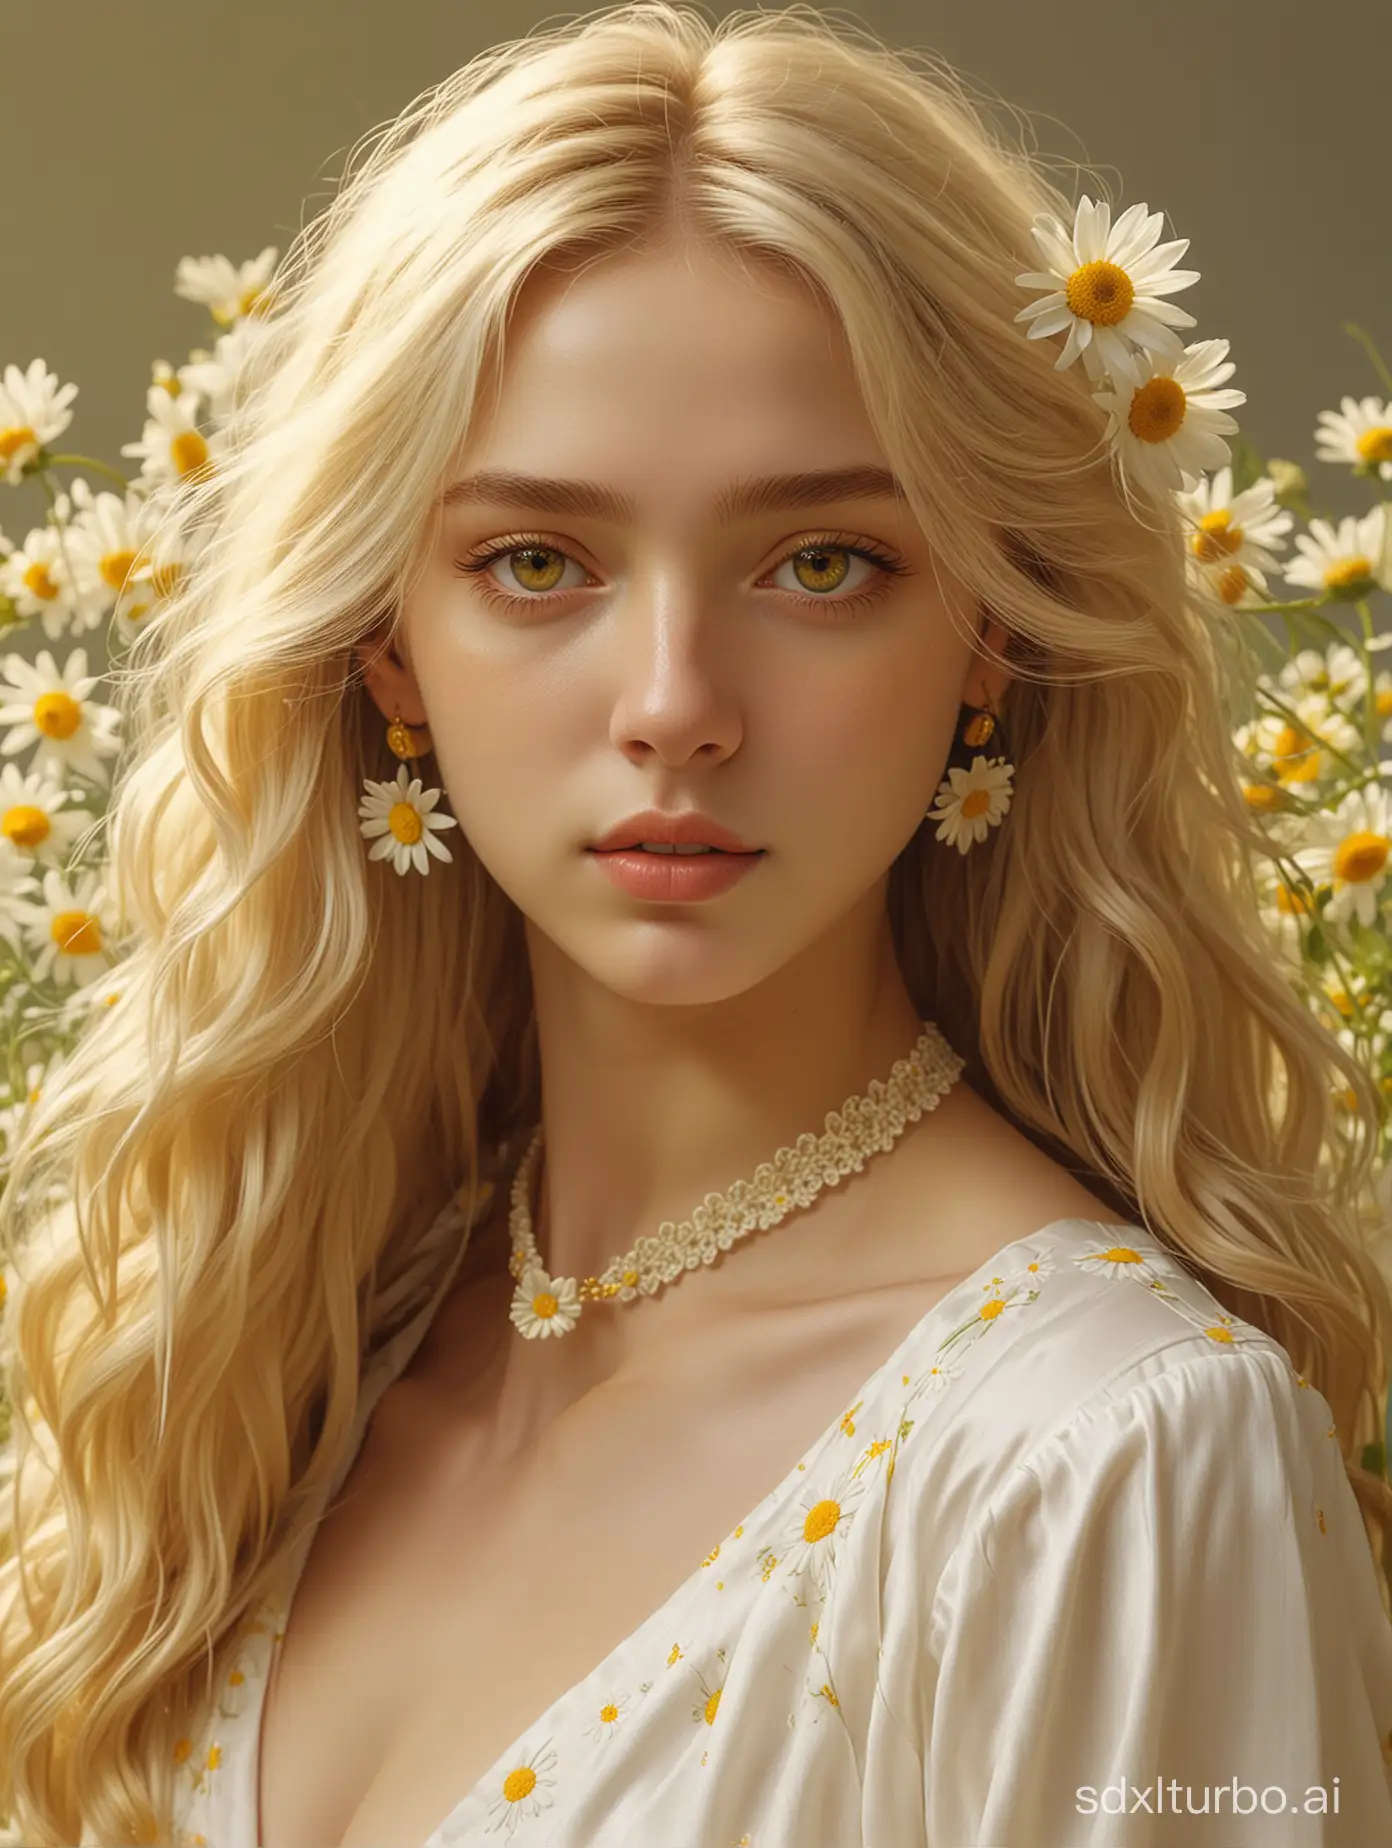 Exquisite-Nude-Portrait-of-a-Girl-with-Yellow-Hair-and-Daisy-Accents